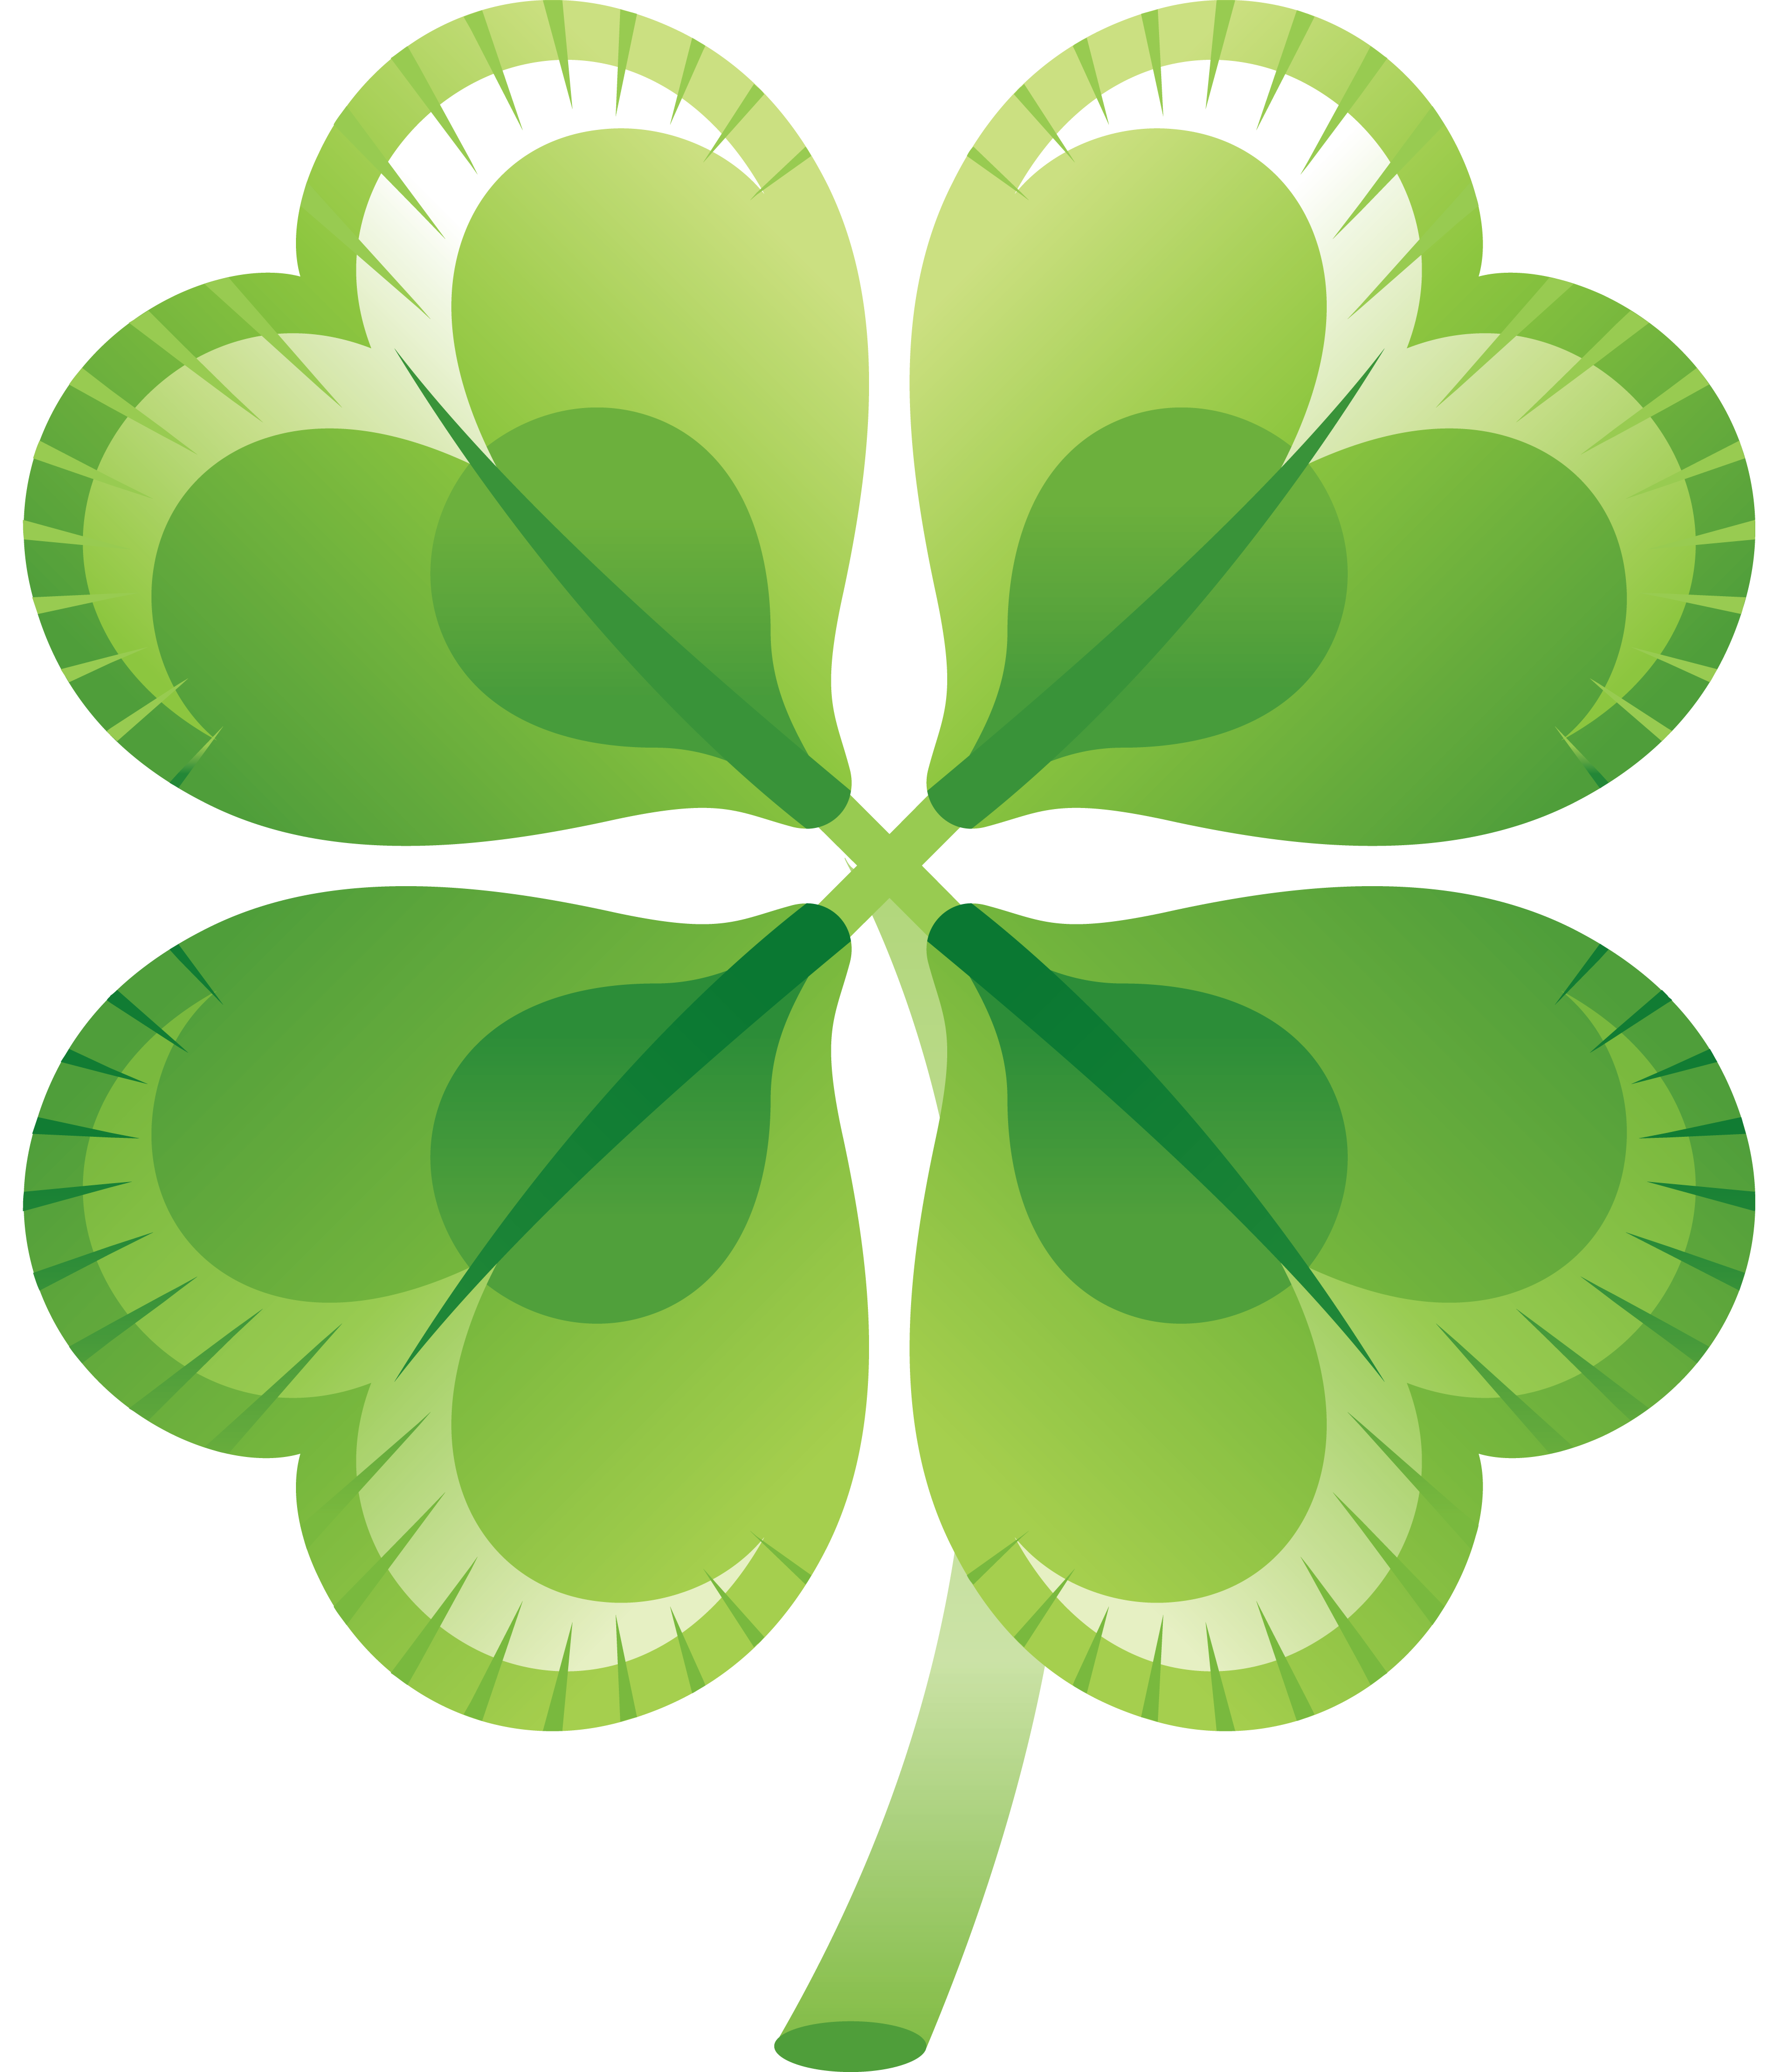 Green clover PNG image